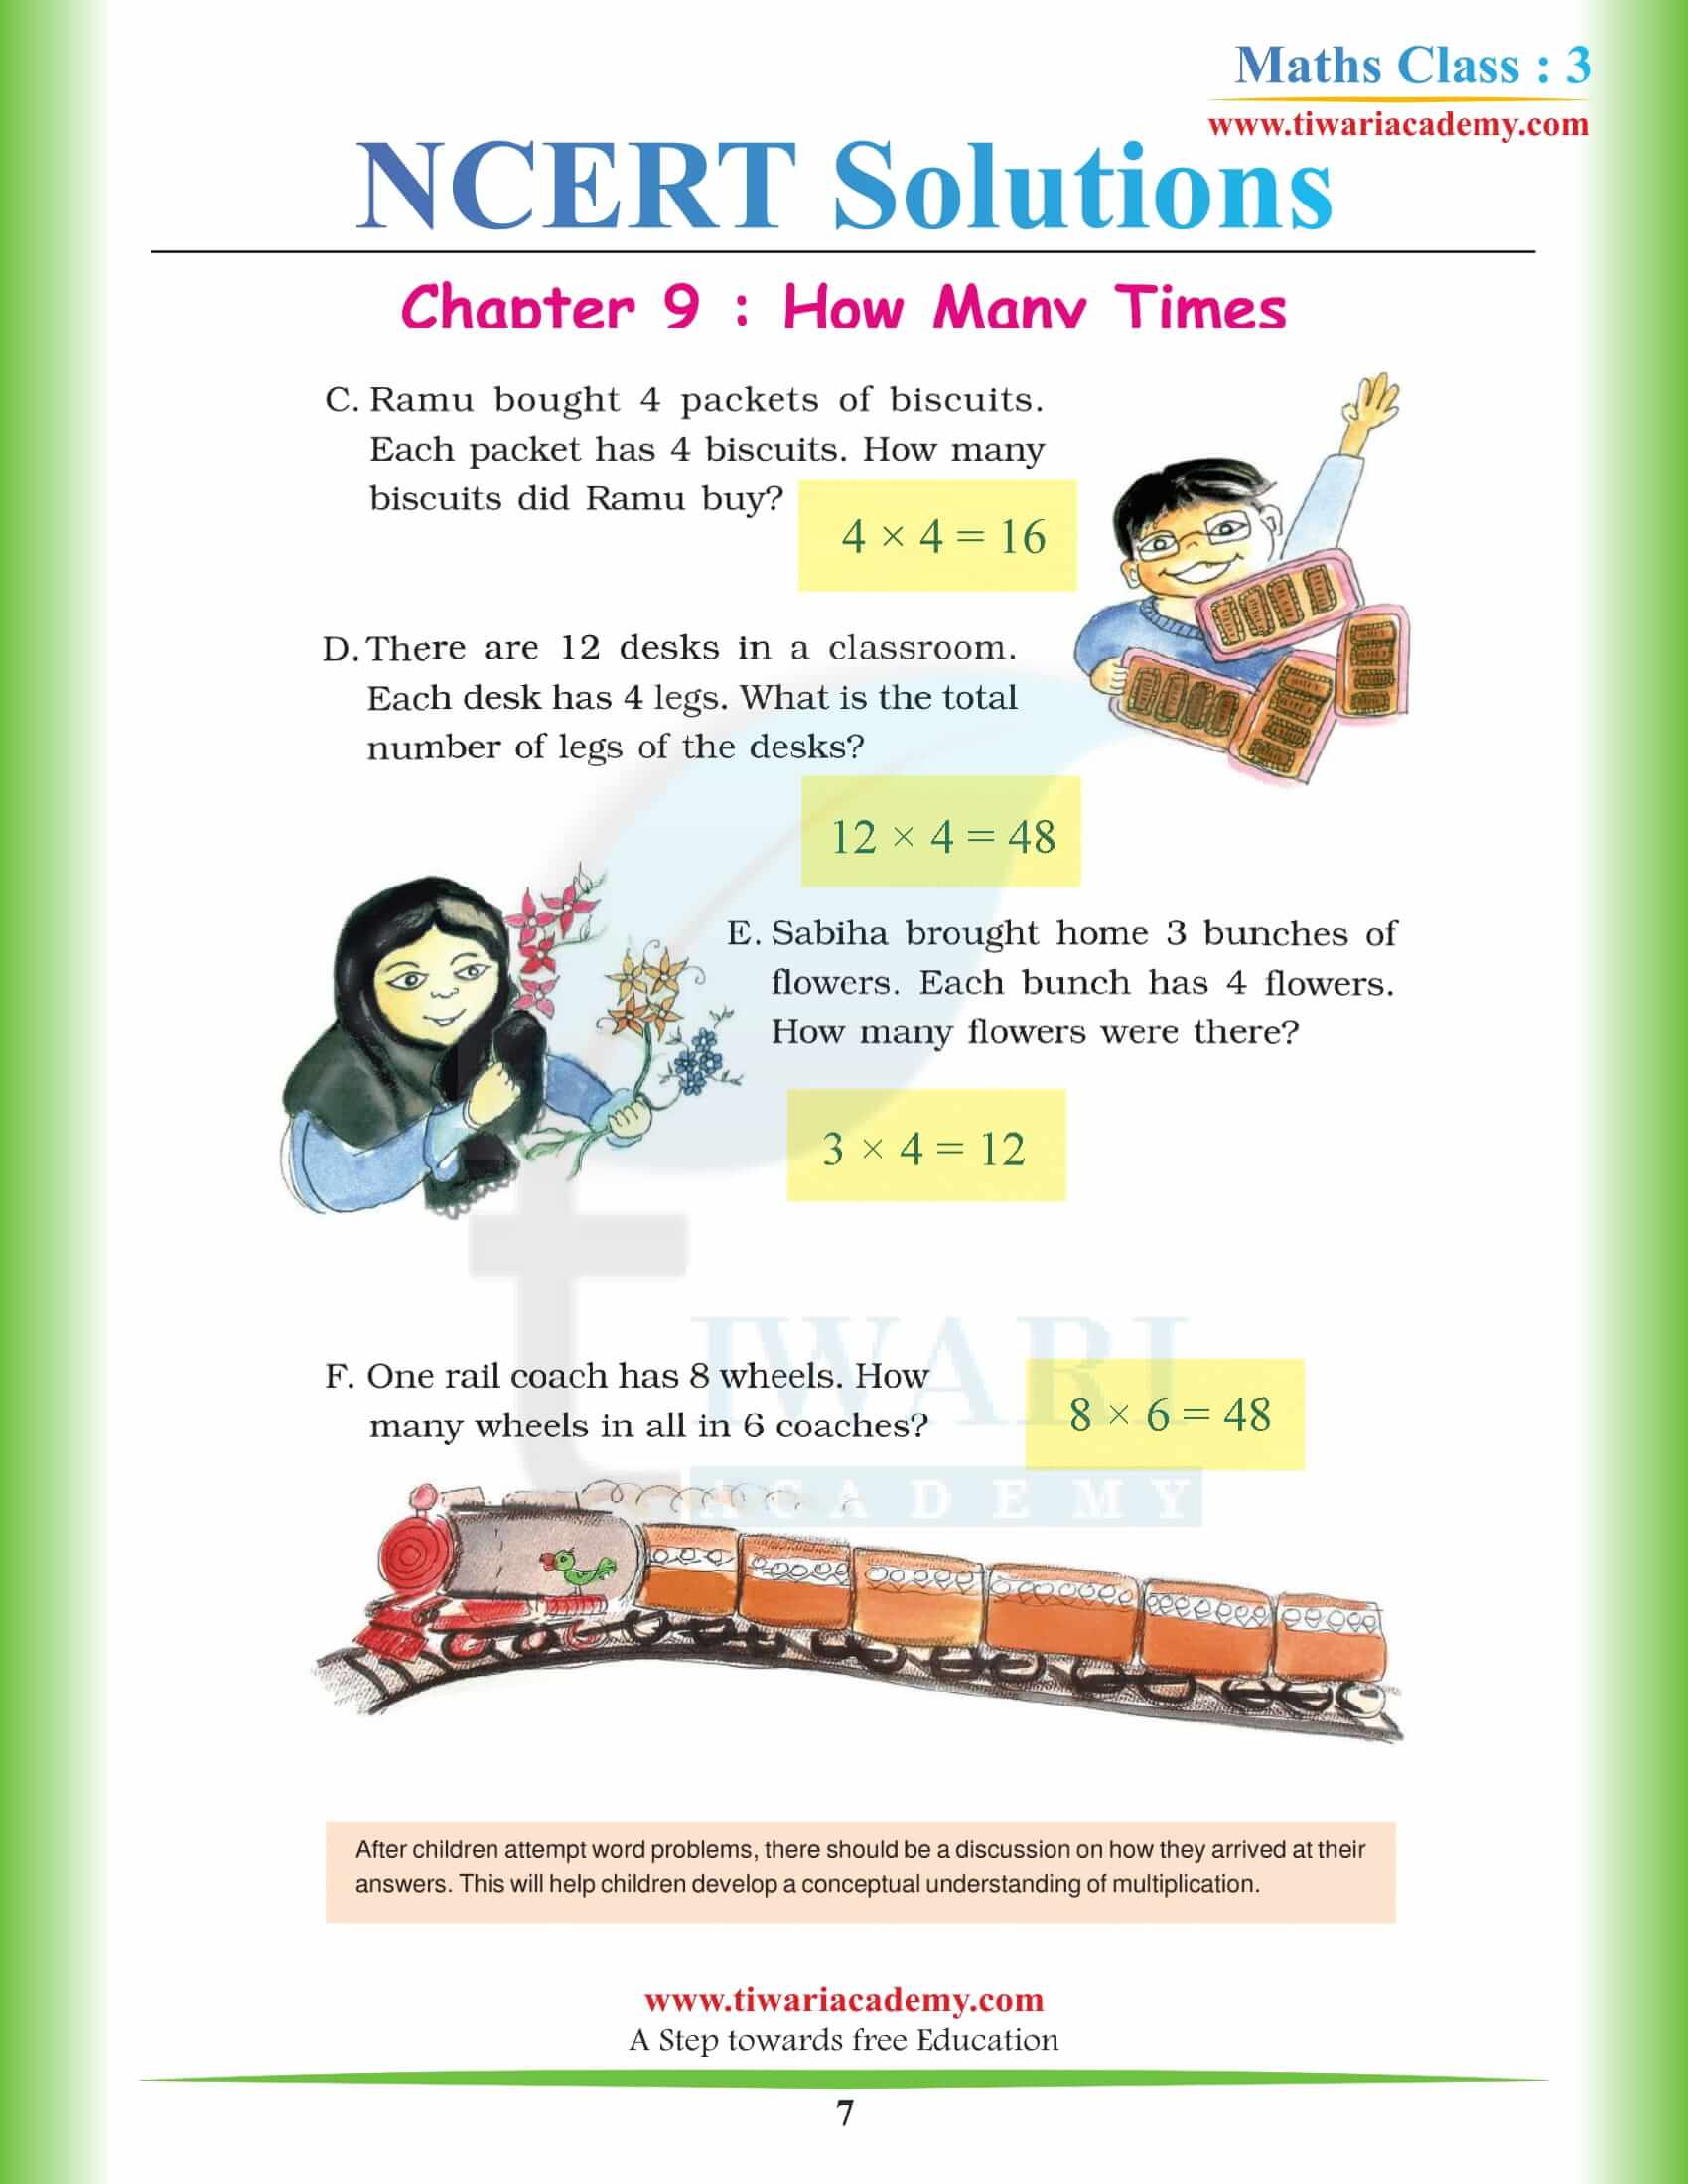 NCERT Solutions for Class 3 Maths Chapter 9 all question answers